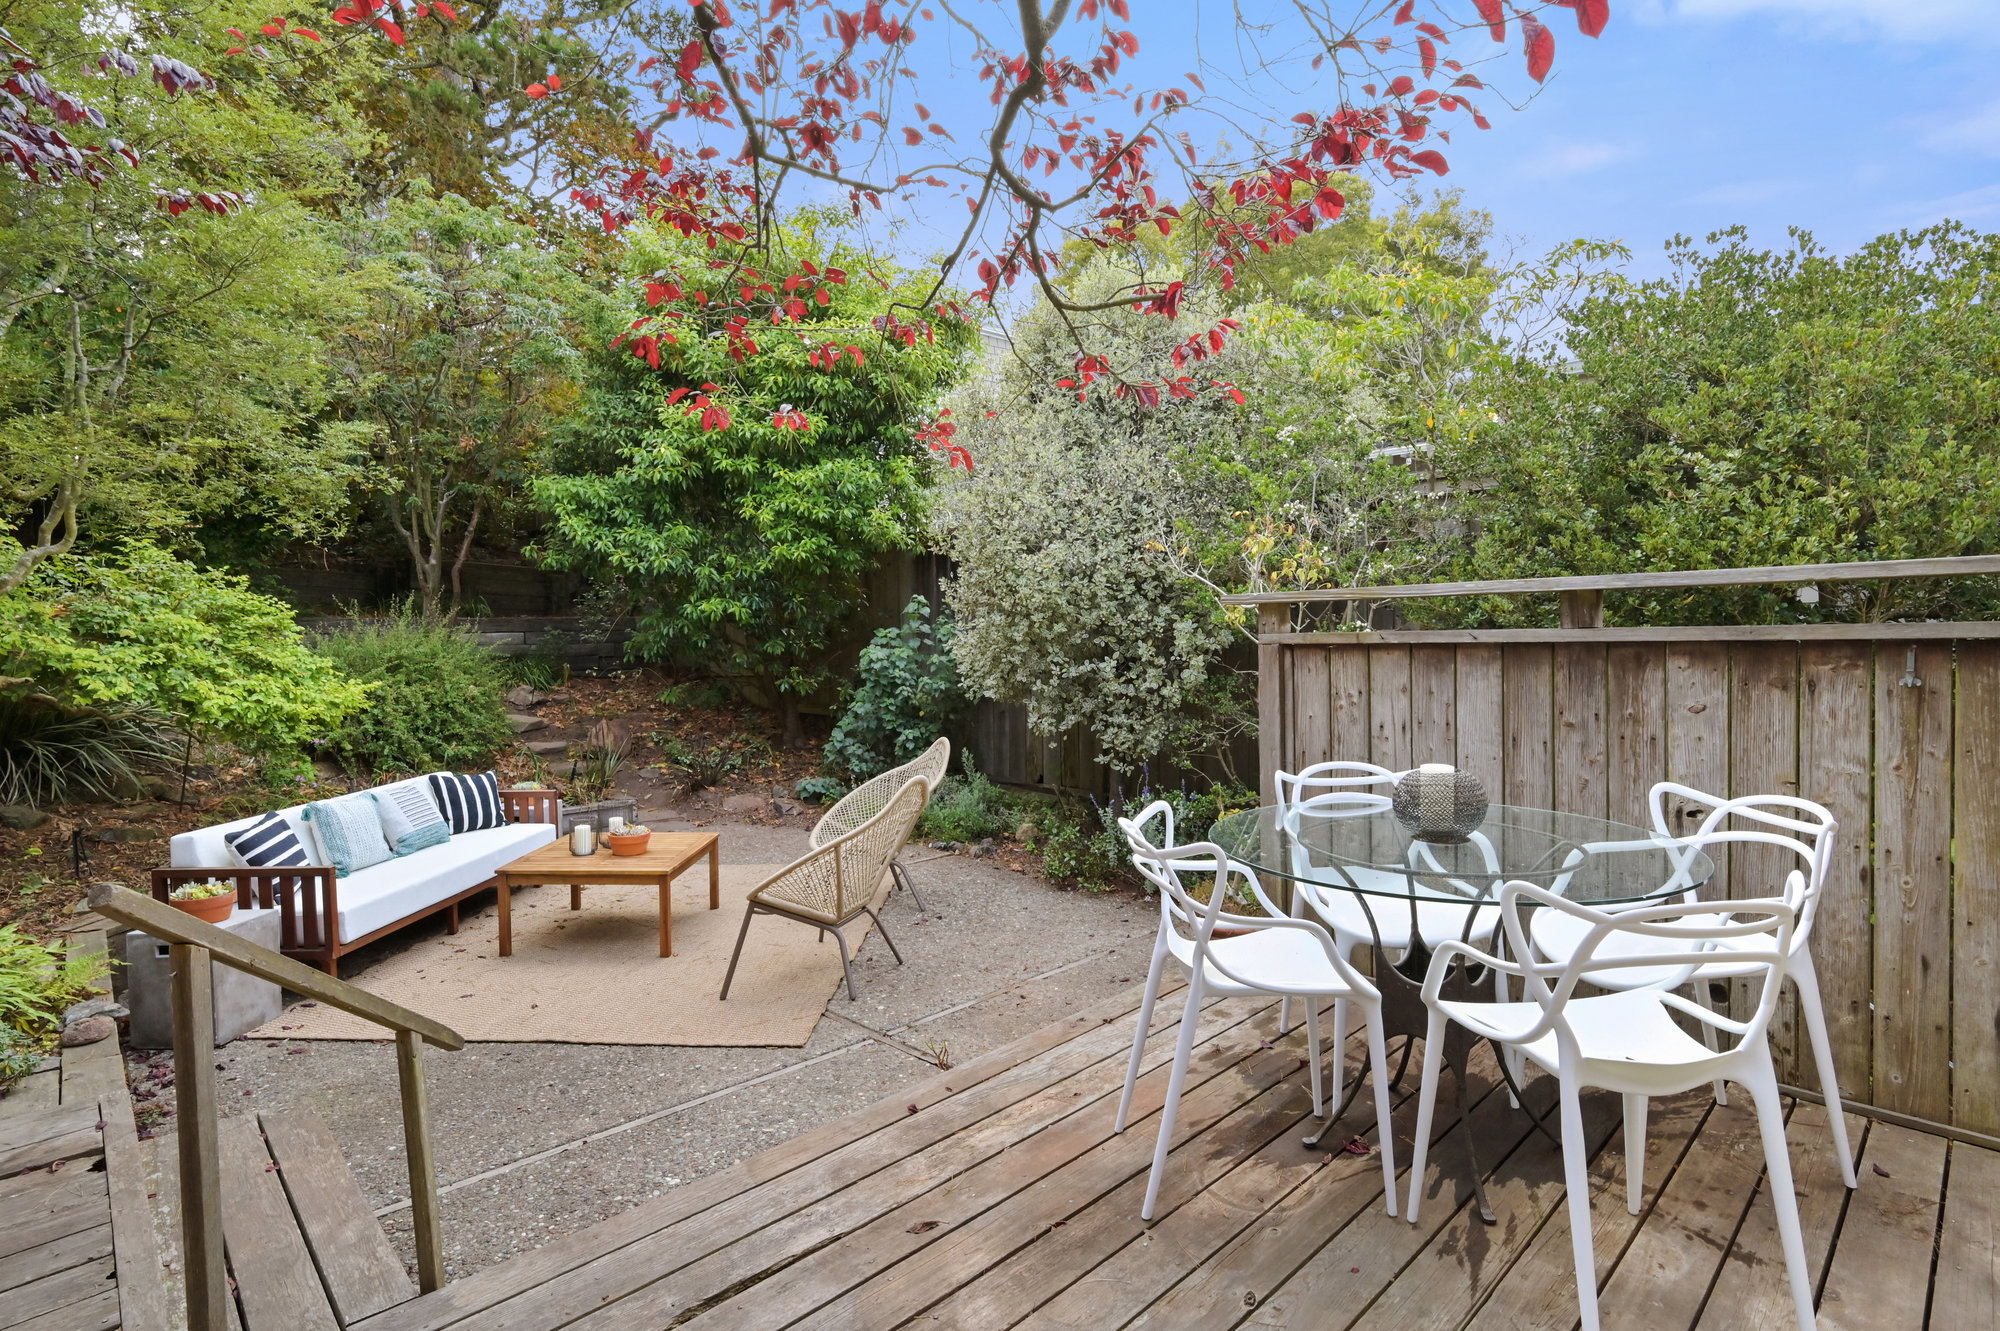 Property Photo: View of the outdoor dining area on the wooden deck with the garden beyond